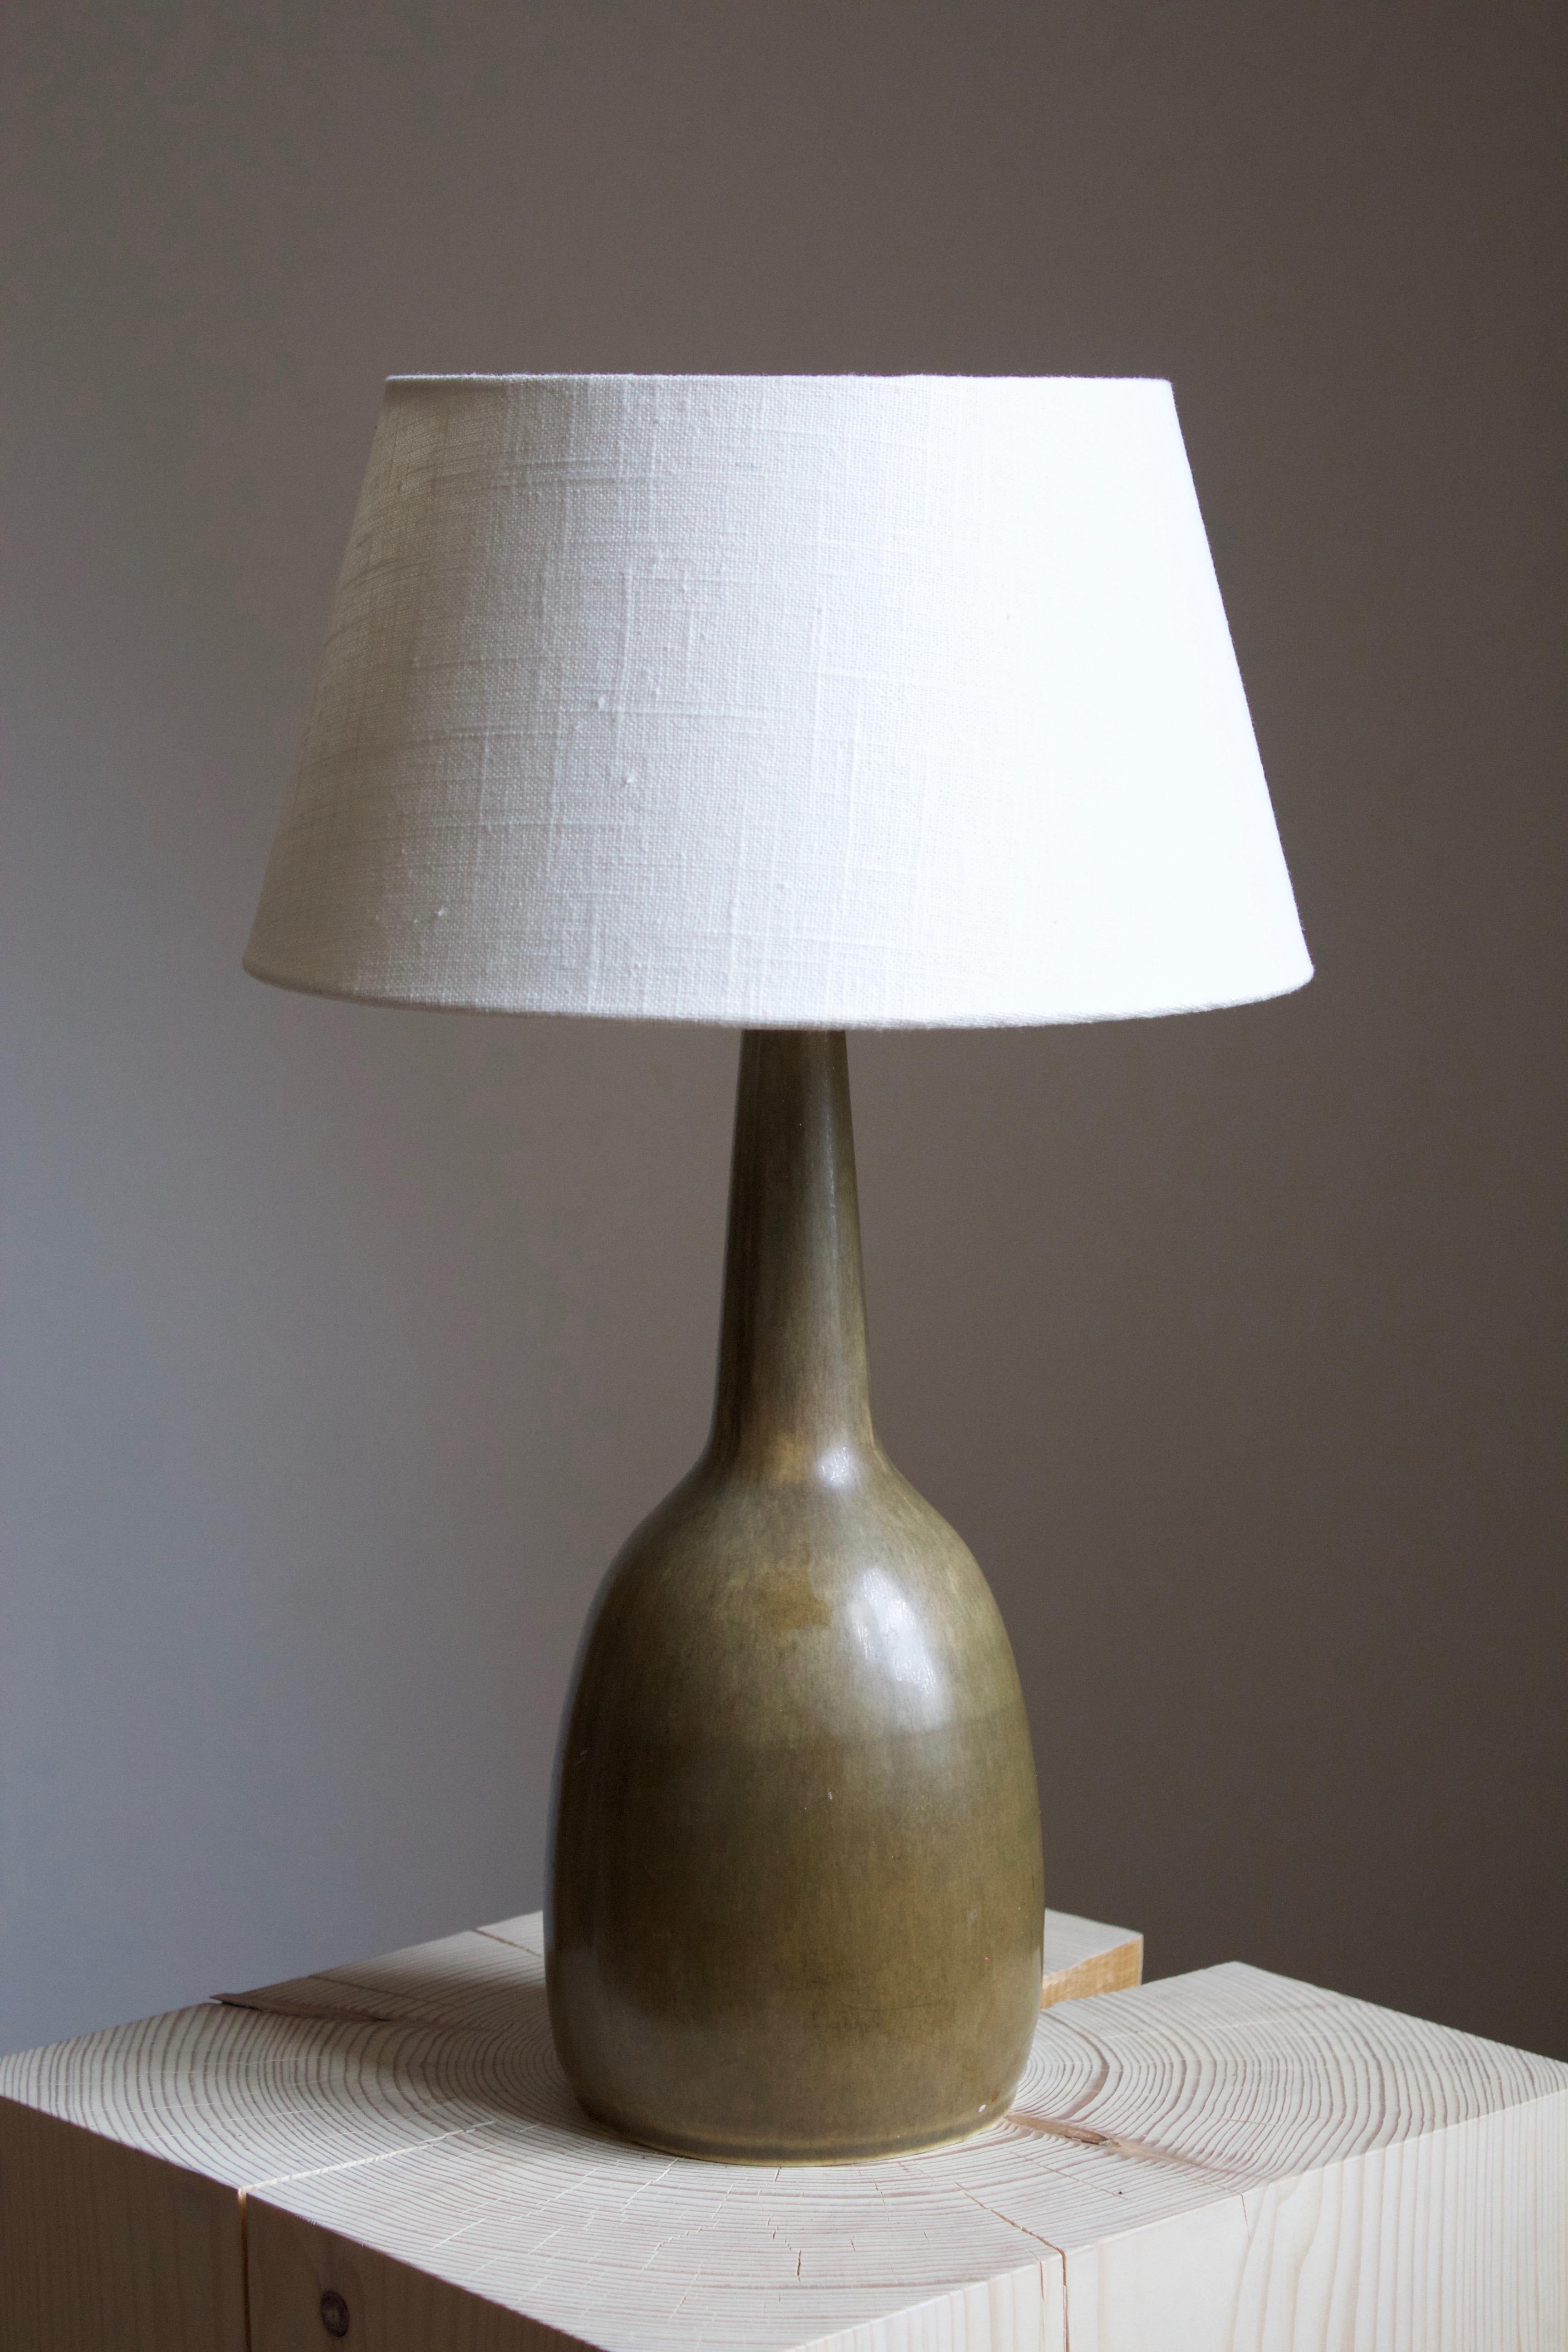 A table / desk lamp designed by husband and wife Per & Annelise Linneman-Schmidt. Handcast in stoneware. Produced in their own Studio, named Palshus, in Sengeløse, Denmark. Signed.

Sold without lampshade. Stated dimensions exclude lampshade.

Glaze